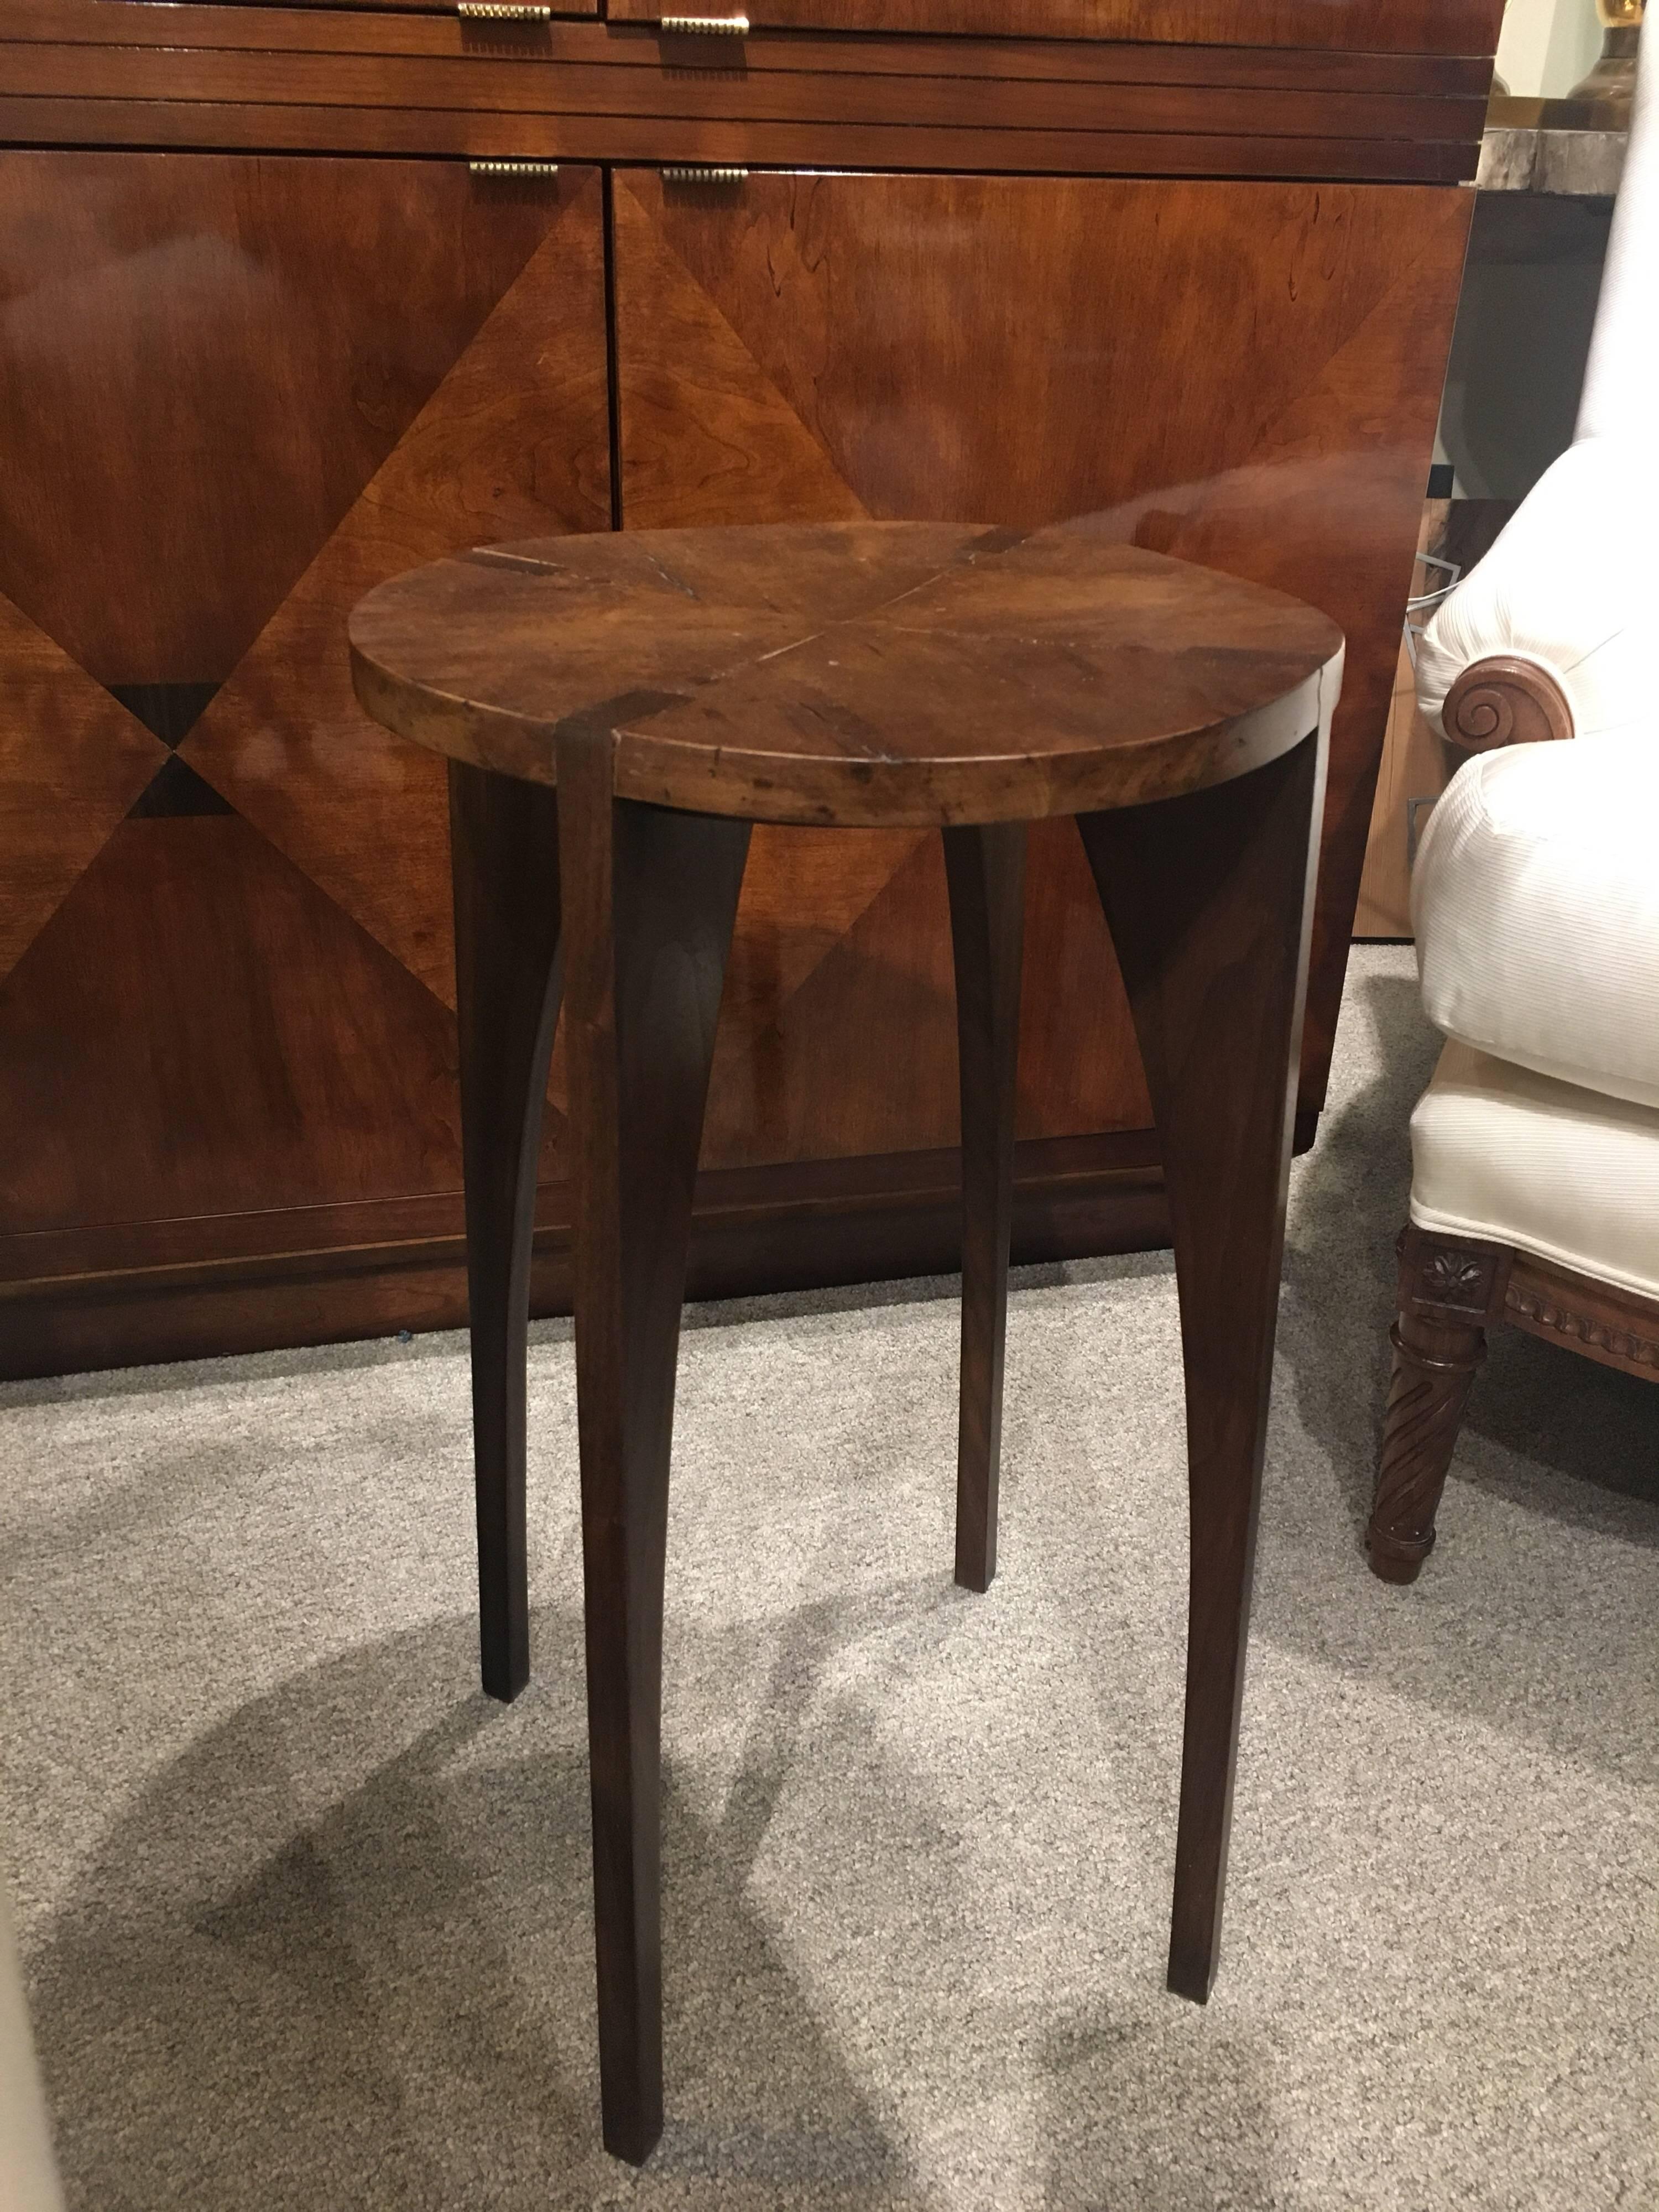 Our splay table is a merge of the old and the new. The legs are made of new timbers shaped in a contemporary manner. The top of this table is made out of antique timbers - ie. walnut, oak, maple, pine. Cracking of the table top is intentional as it